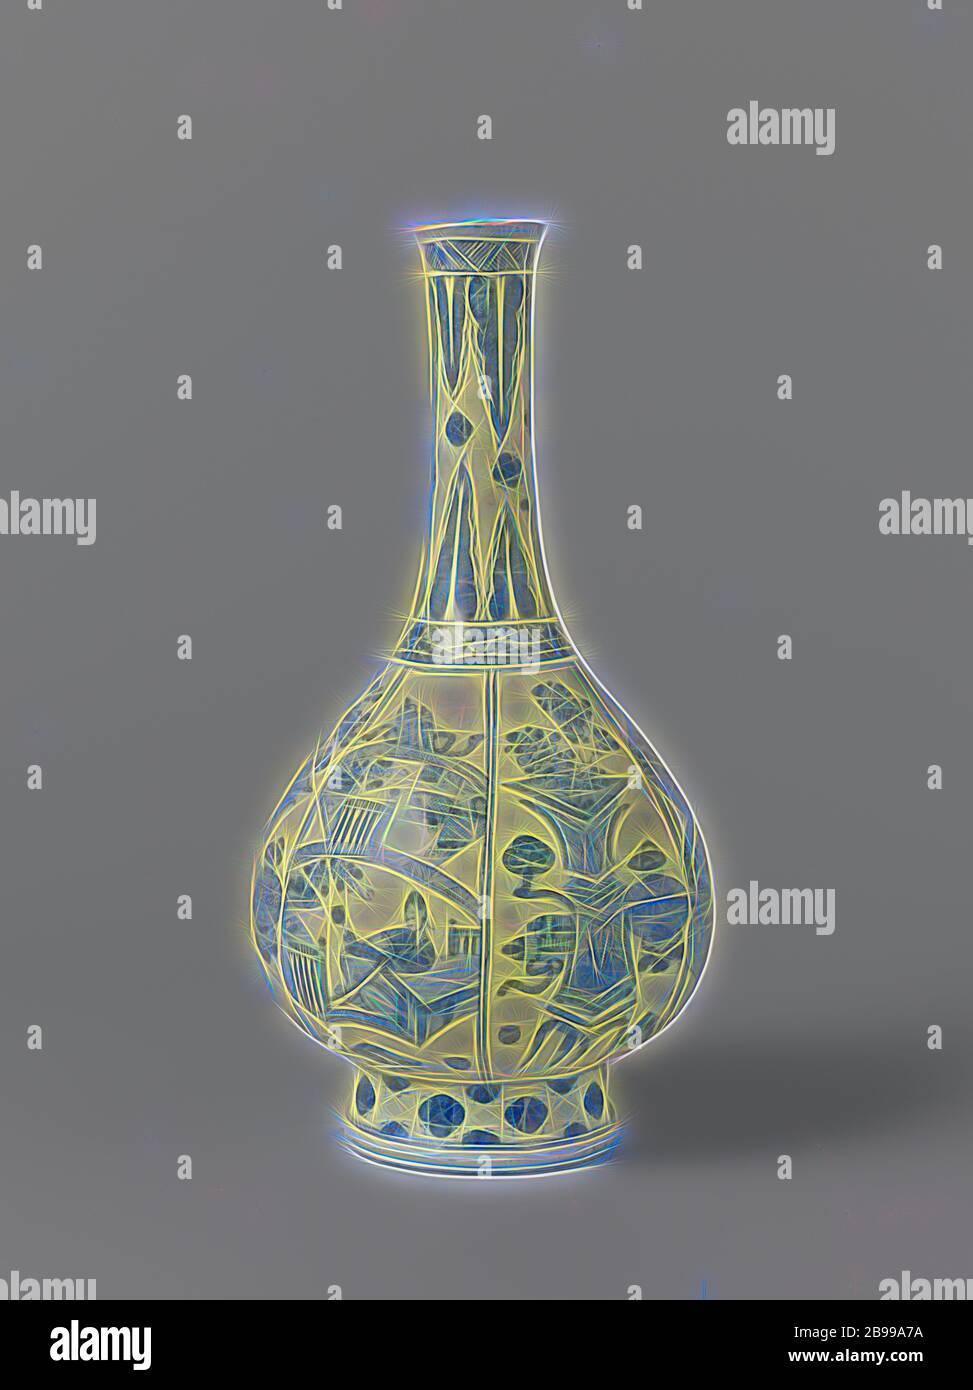 Vase Vase, Vase of faience after the example of Chinese porcelain from the Kangxi period, Chinese (other cultural aspects), De Grieksche A, Delft, c. 1722 - c. 1757, h 26.2 cm × d 13 cm, Weesp, c. 1759–1771, Reimagined by Gibon, design of warm cheerful glowing of brightness and light rays radiance. Classic art reinvented with a modern twist. Photography inspired by futurism, embracing dynamic energy of modern technology, movement, speed and revolutionize culture. Stock Photo